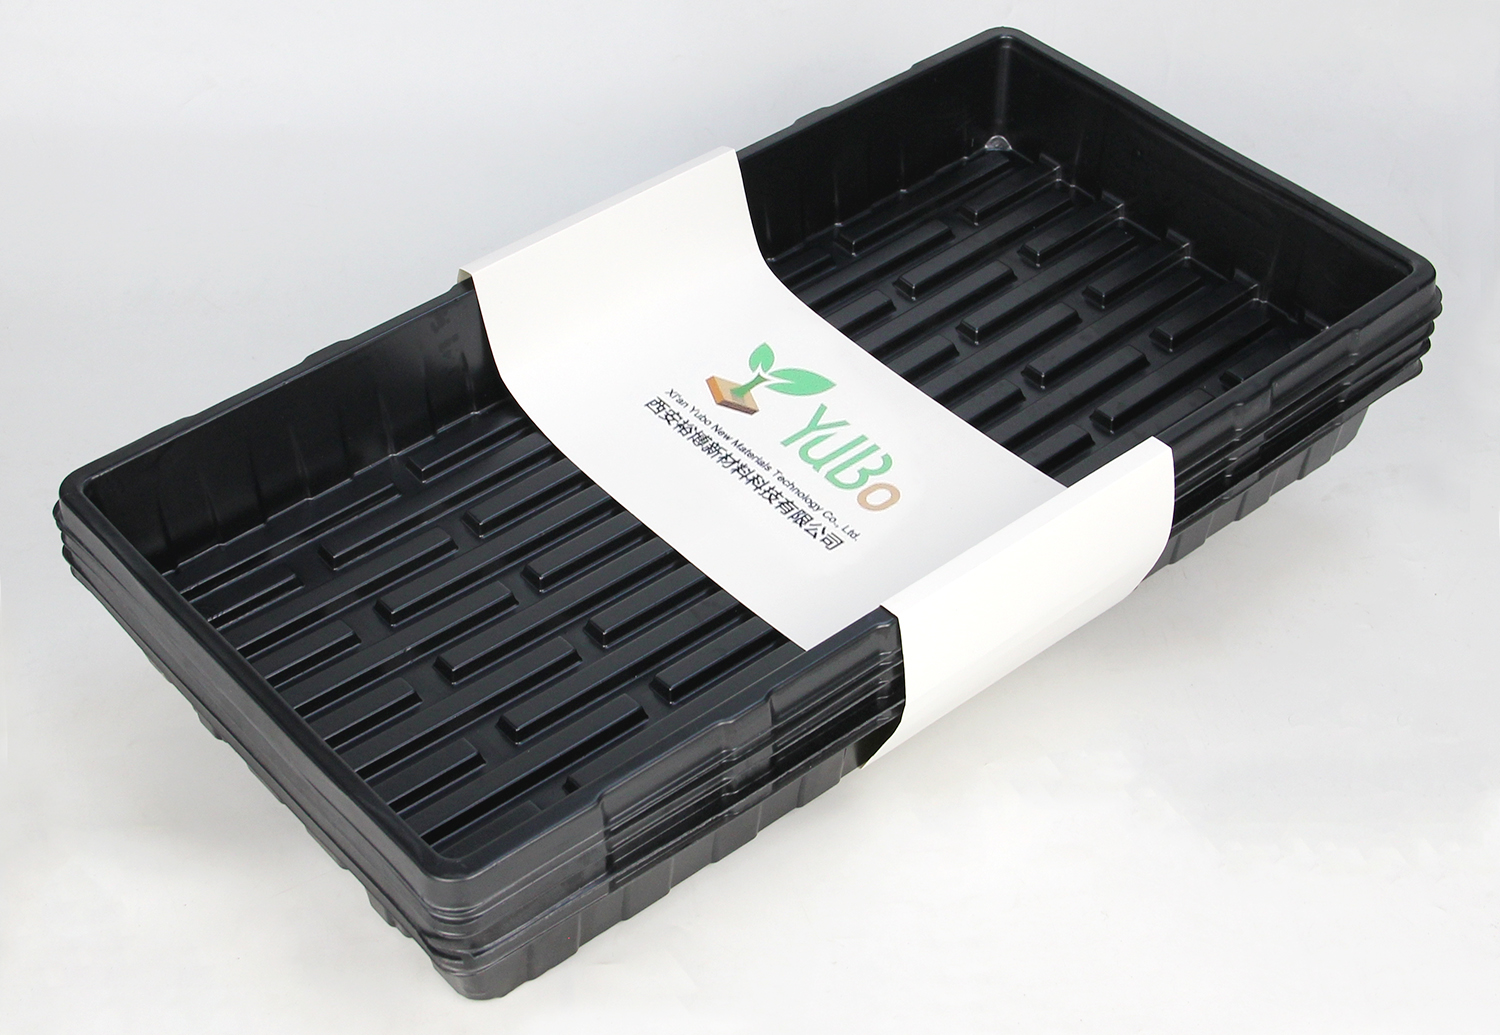 YuBo: Your customized seed tray solution